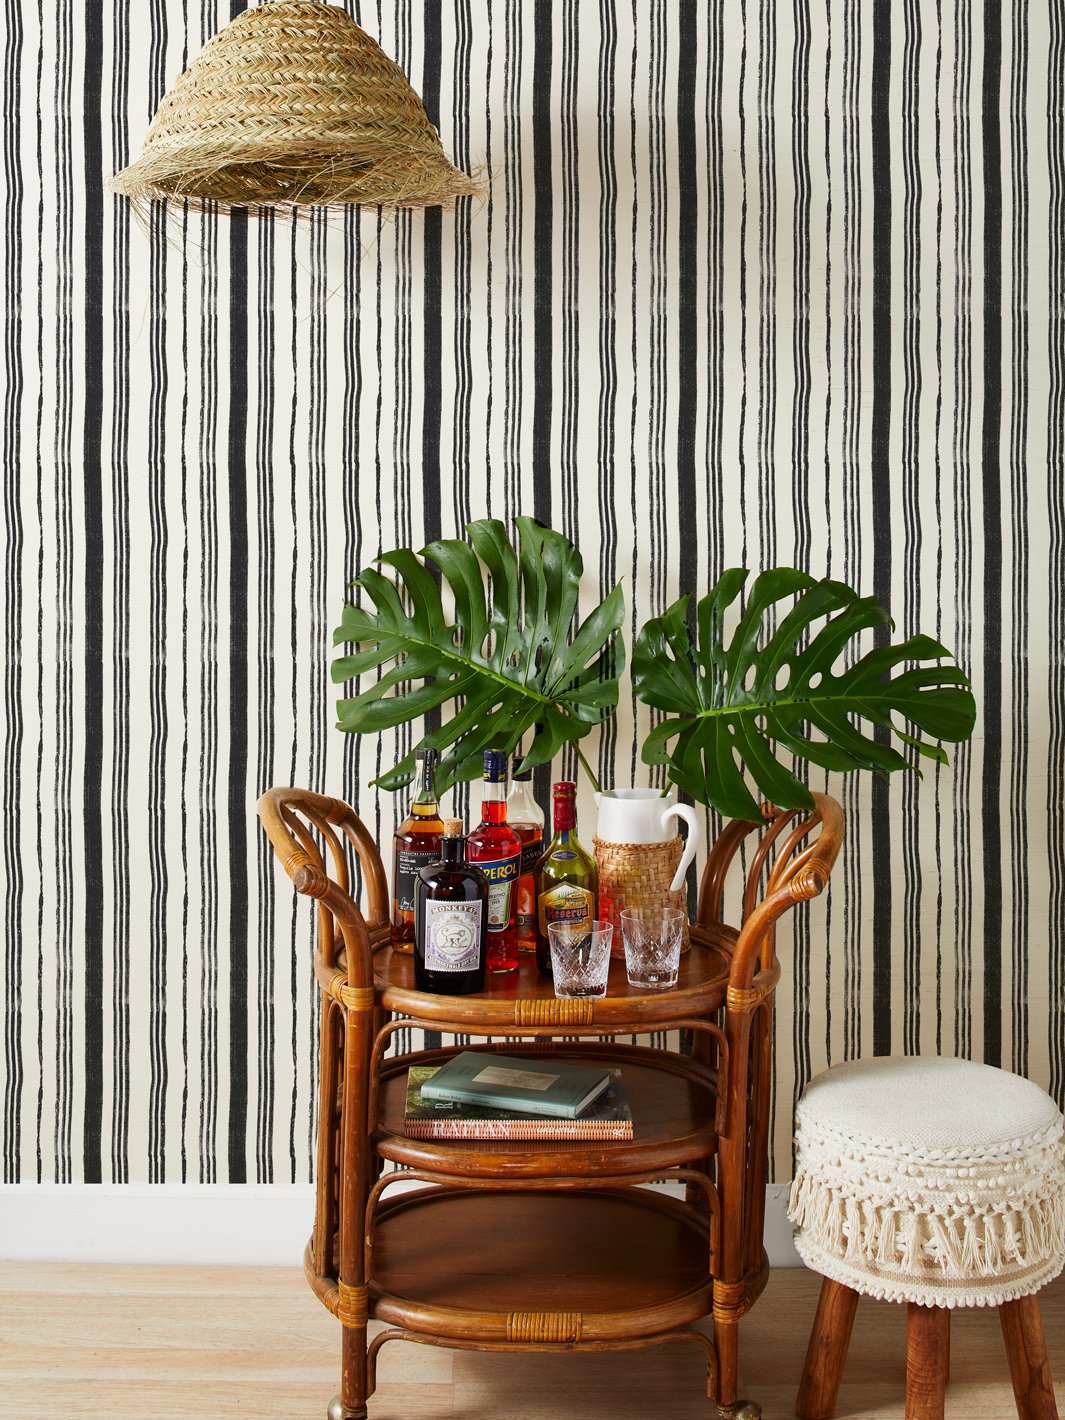 'Painted Stripes' Grasscloth' Wallpaper by Nathan Turner - Black